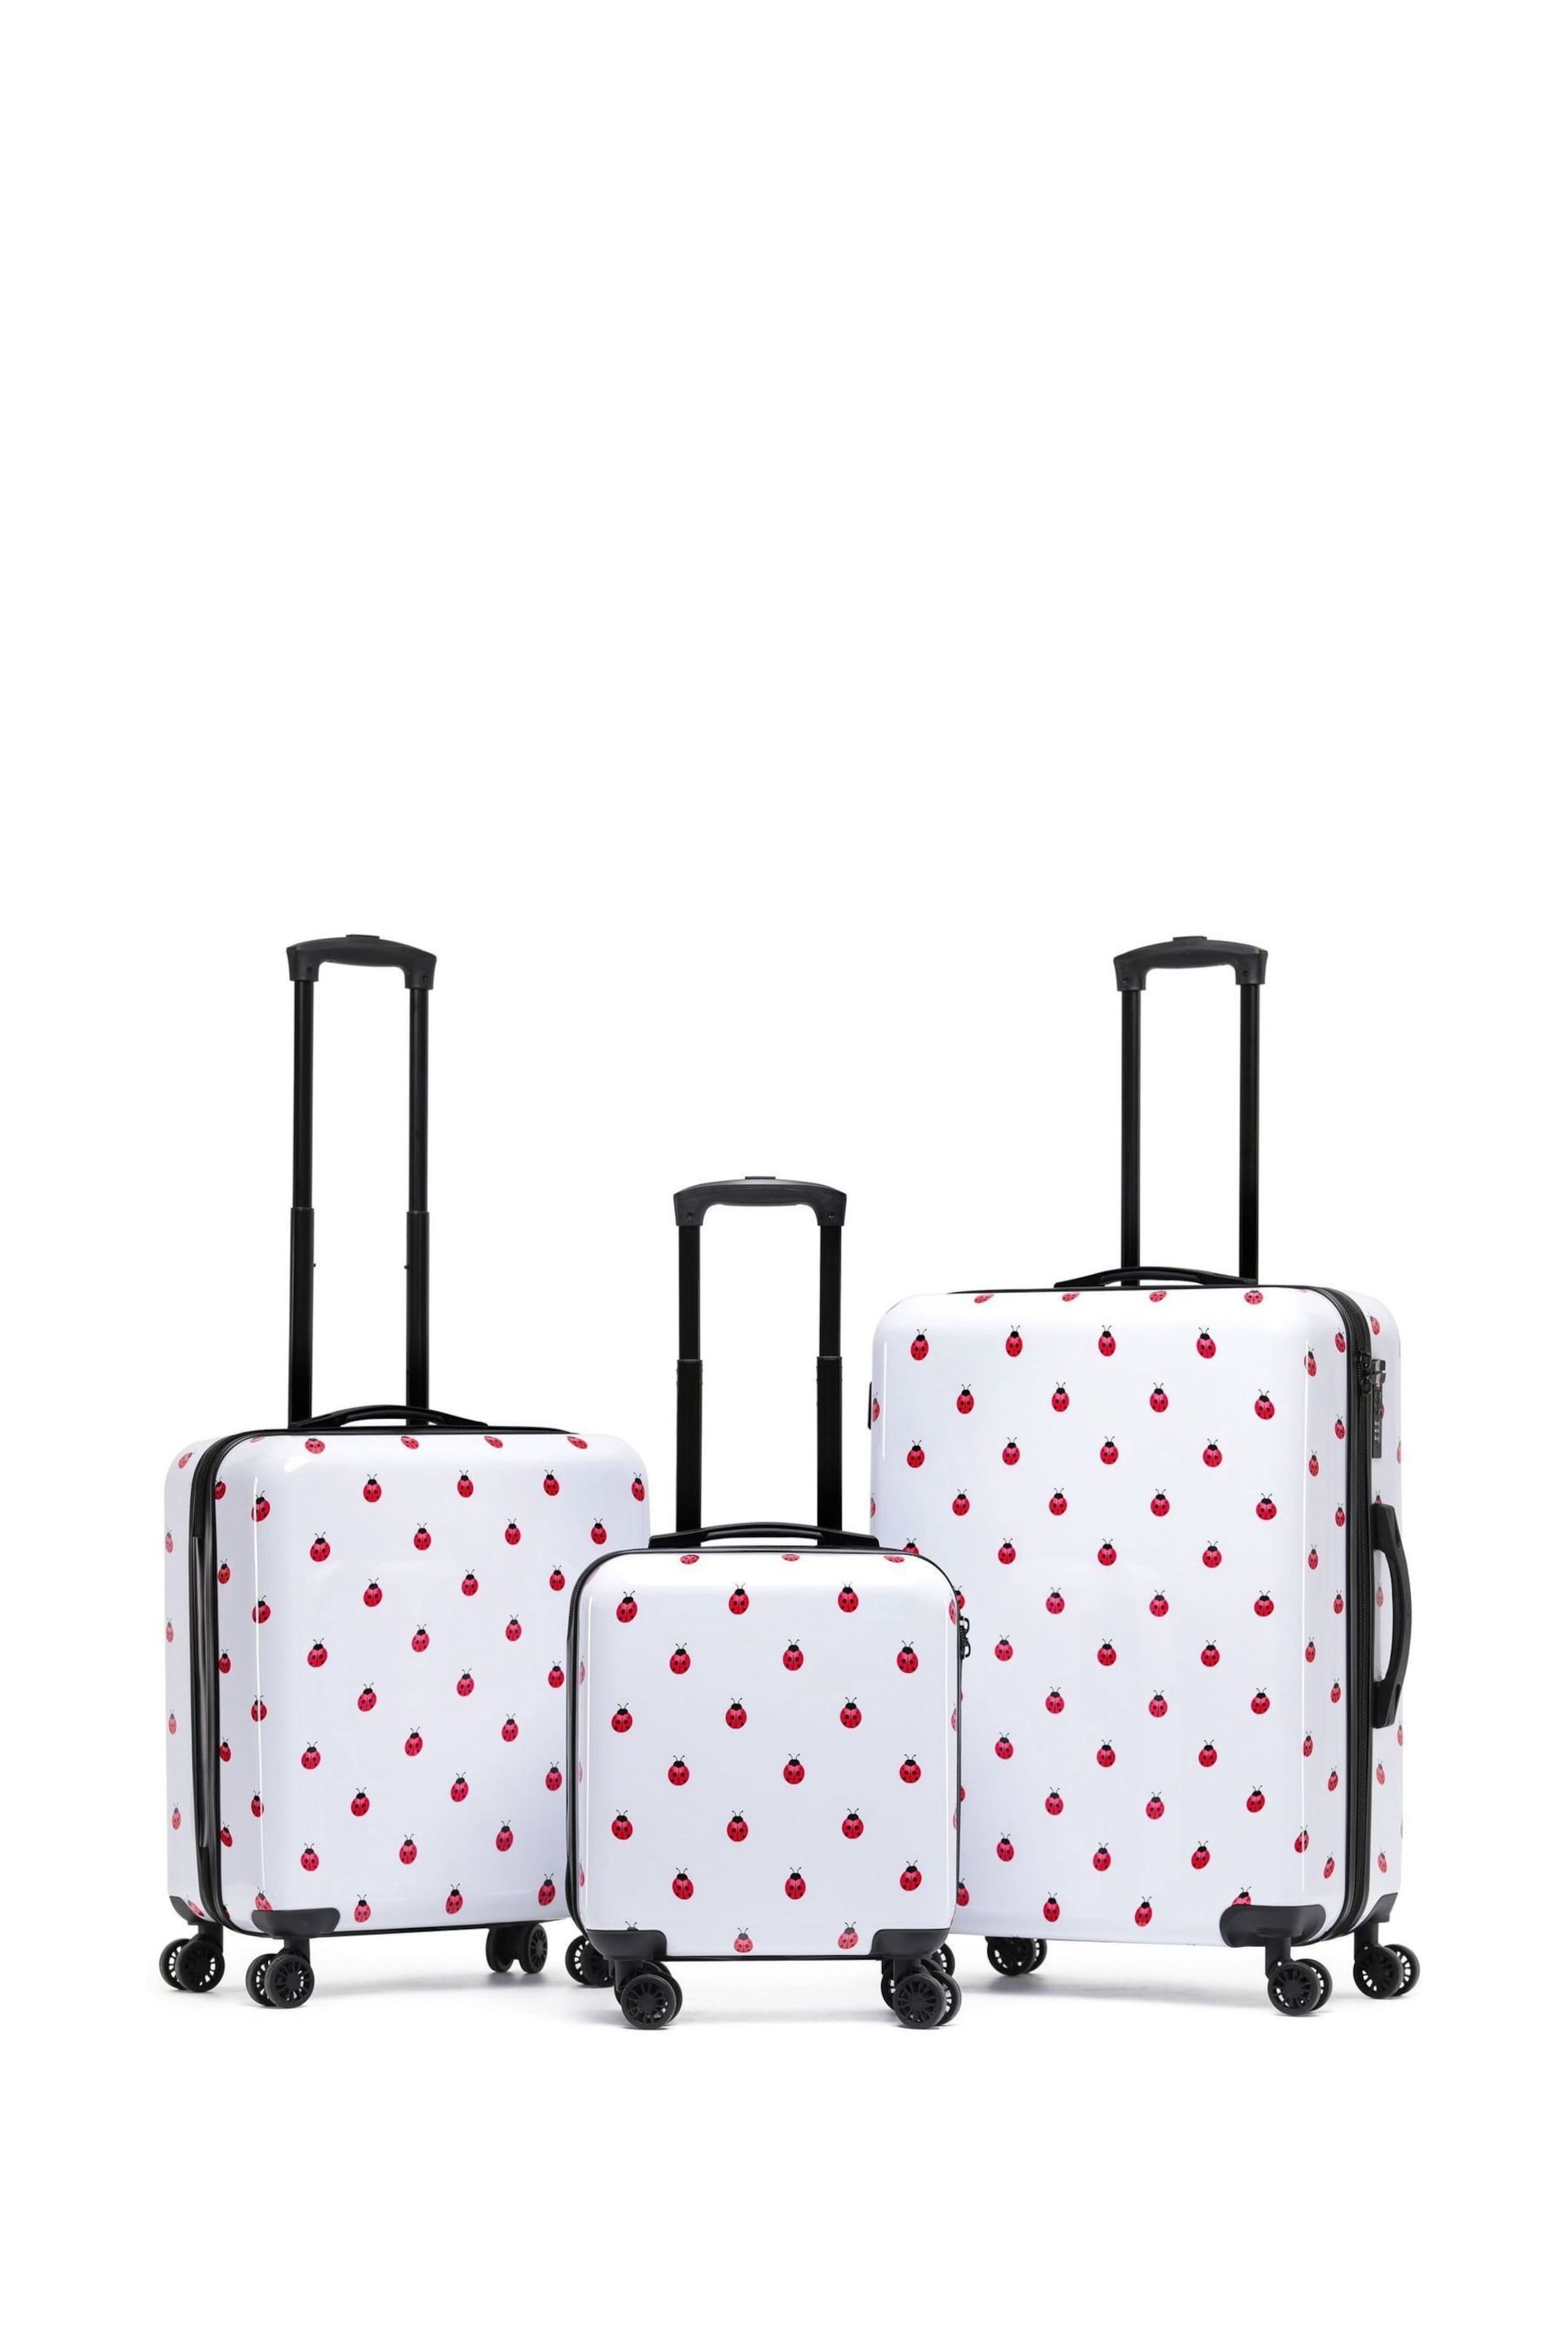 Flight Knight Medium & Small Carry-On For easyJet Hardcase Travel Pink Suitcase Set Of 2 - Image 2 of 9